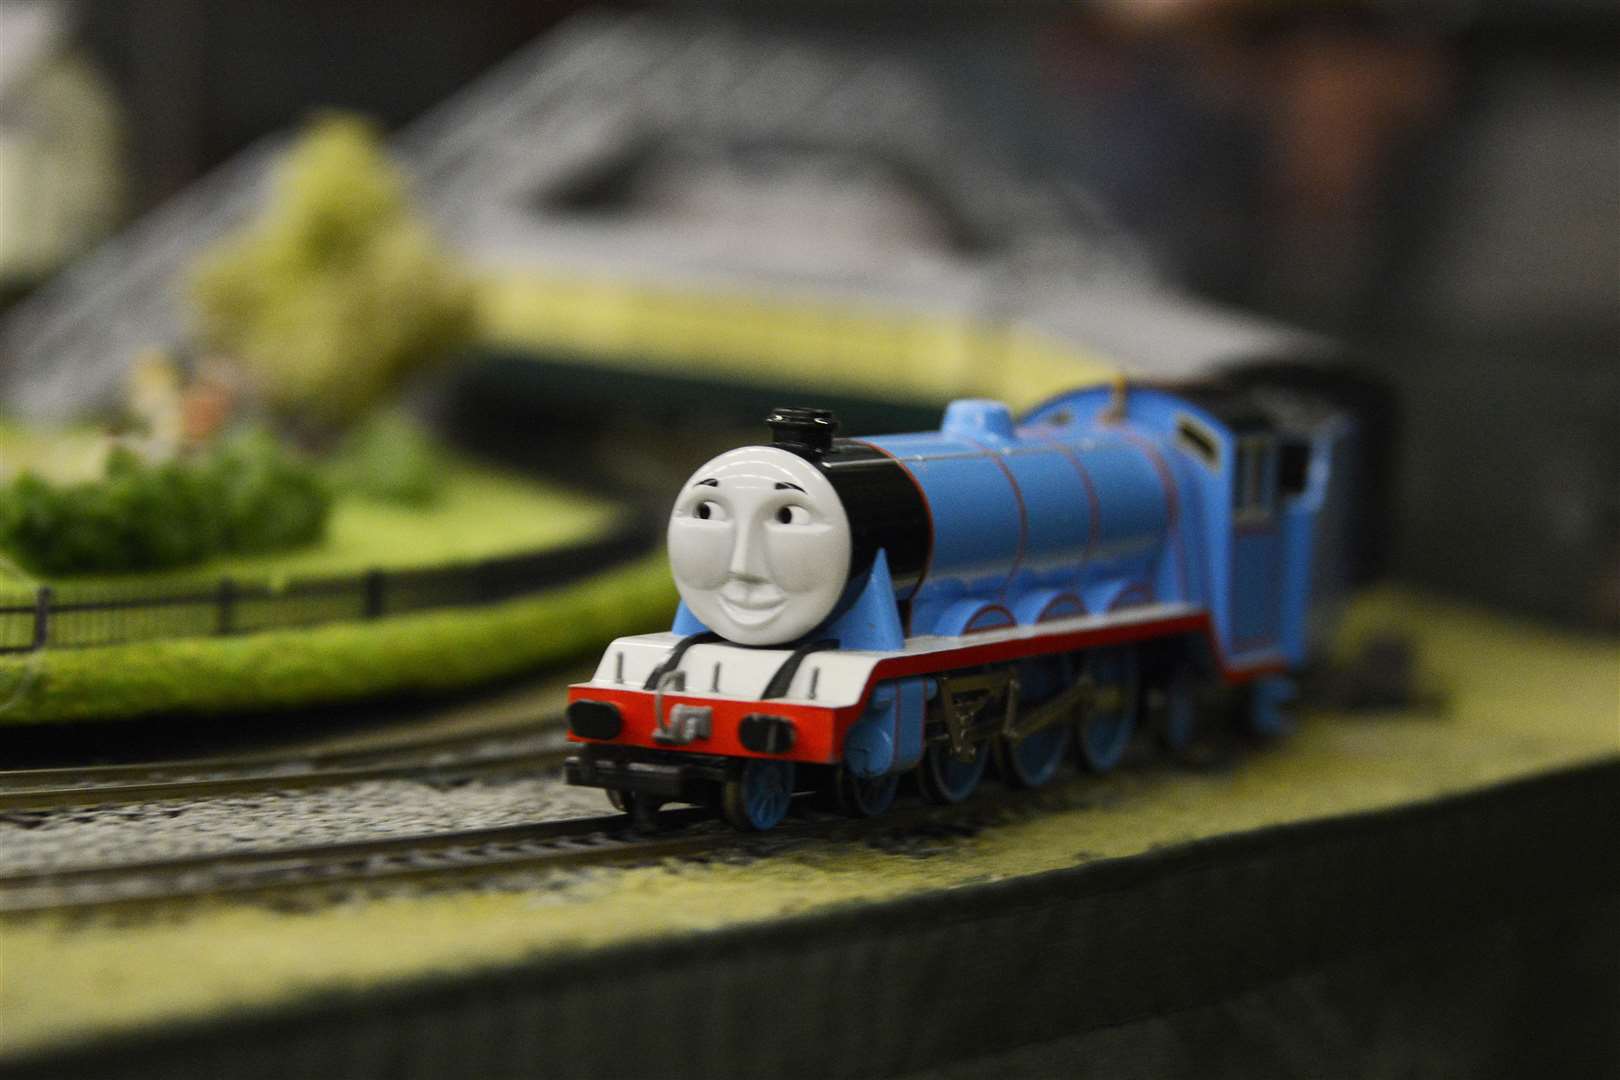 Thomas the Tank Engine features heavily in the toys children can play with!